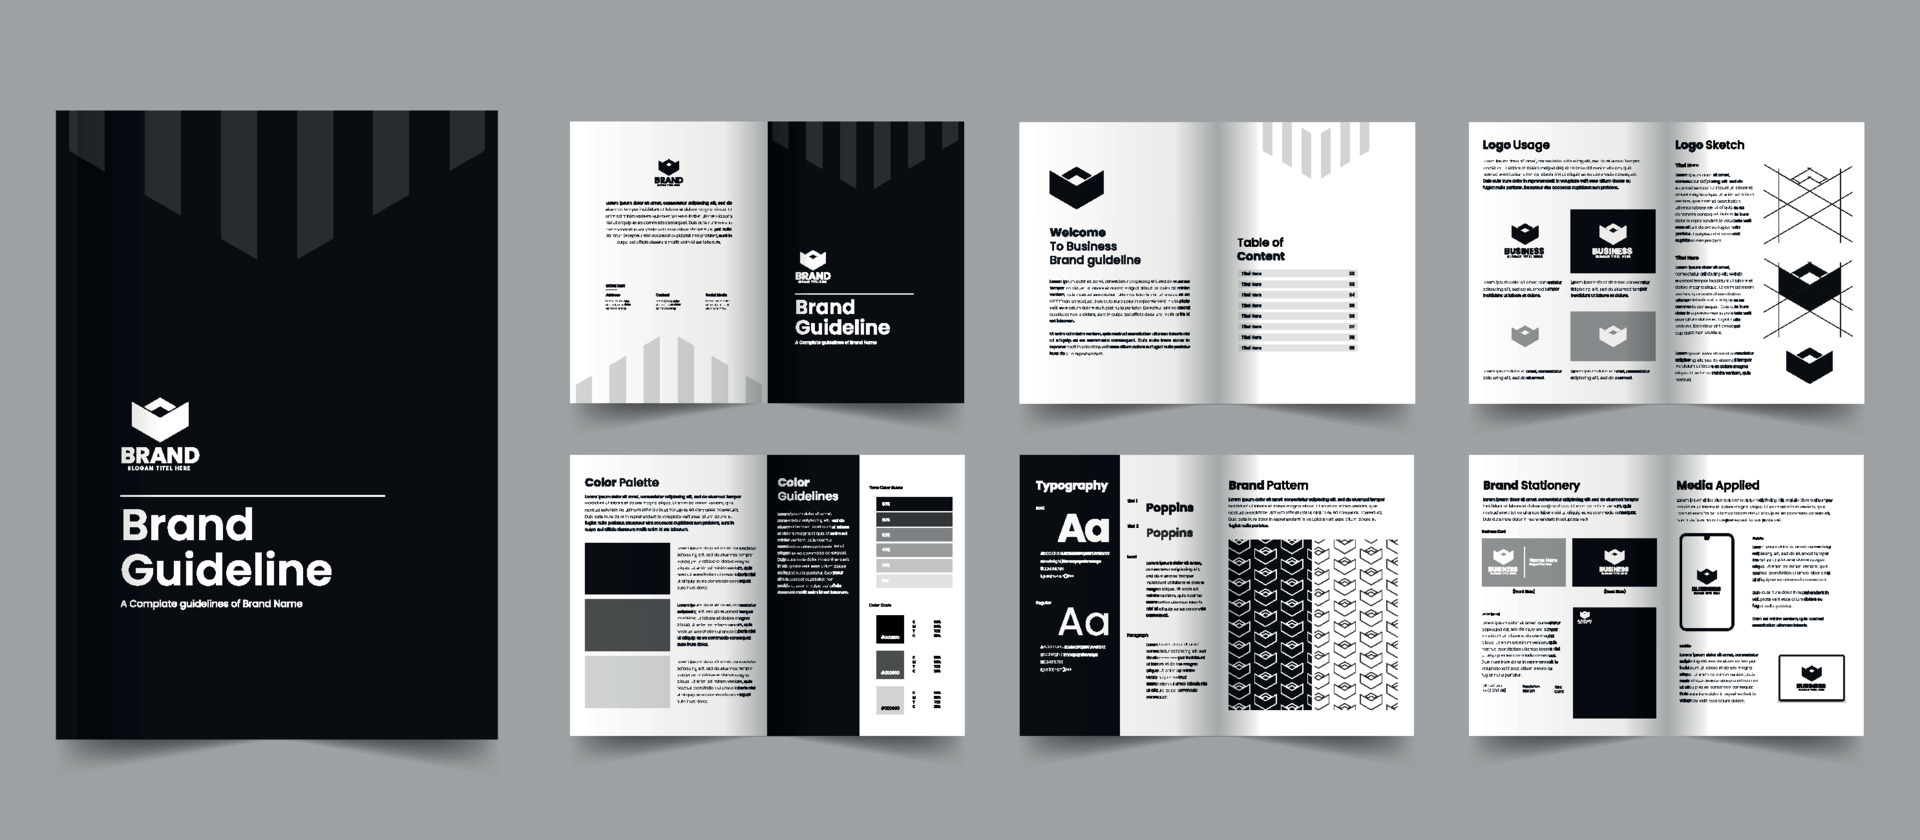 Branding Guidelines Template for Adobe Photoshop Illustrator and Sketch